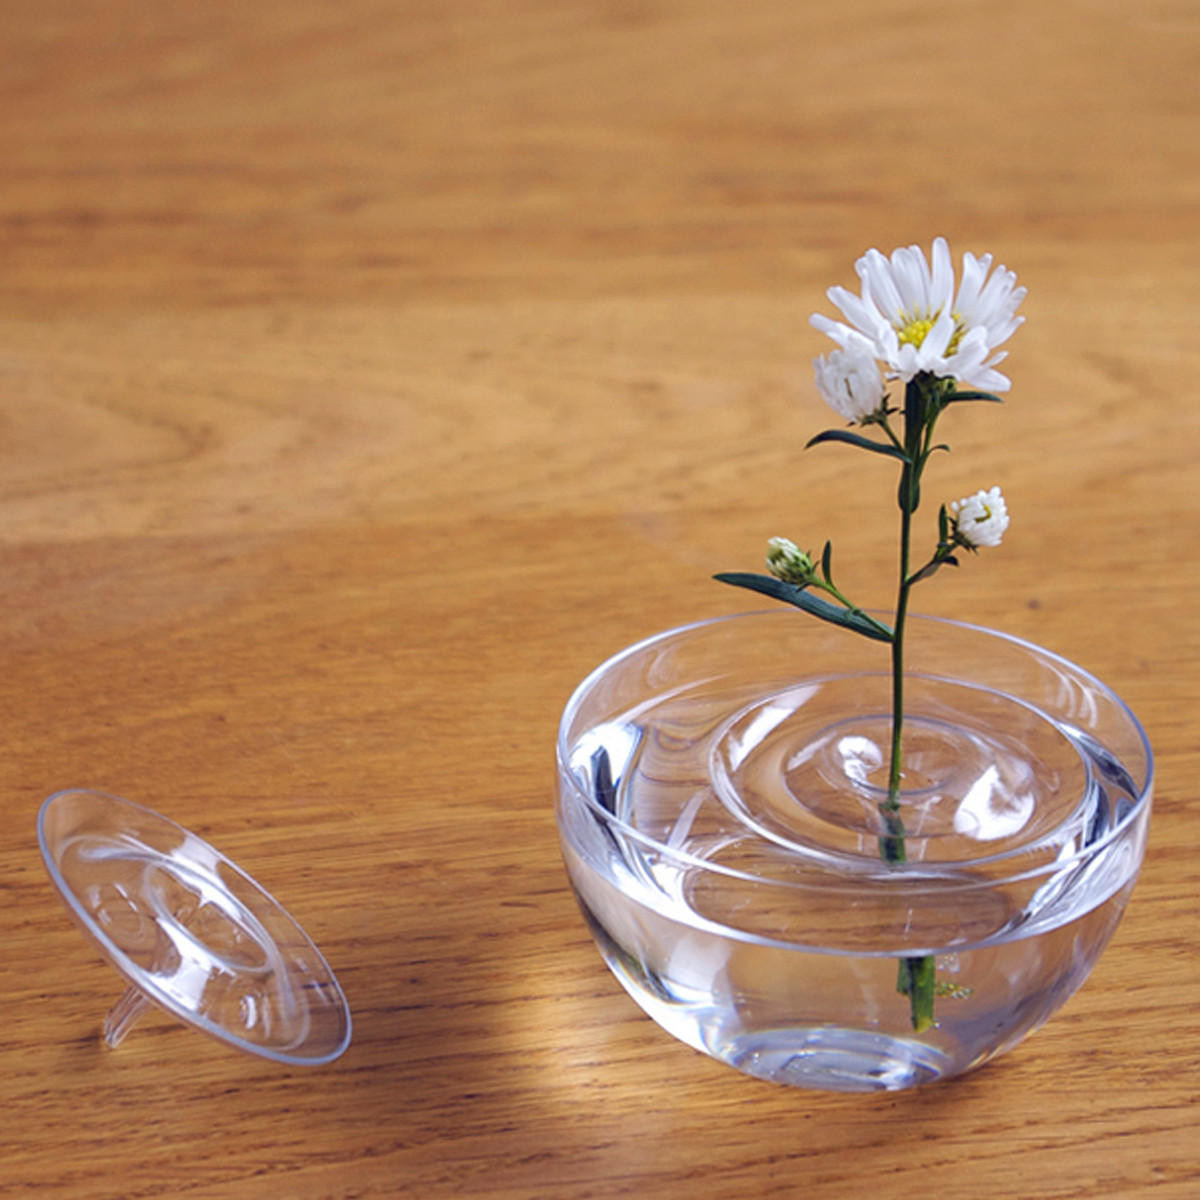 round fish bowl vase of clear floating plant vase plate dish creative water wave transparent inside clear floating plant vase plate dish creative water wave transparent glass bowl decoration